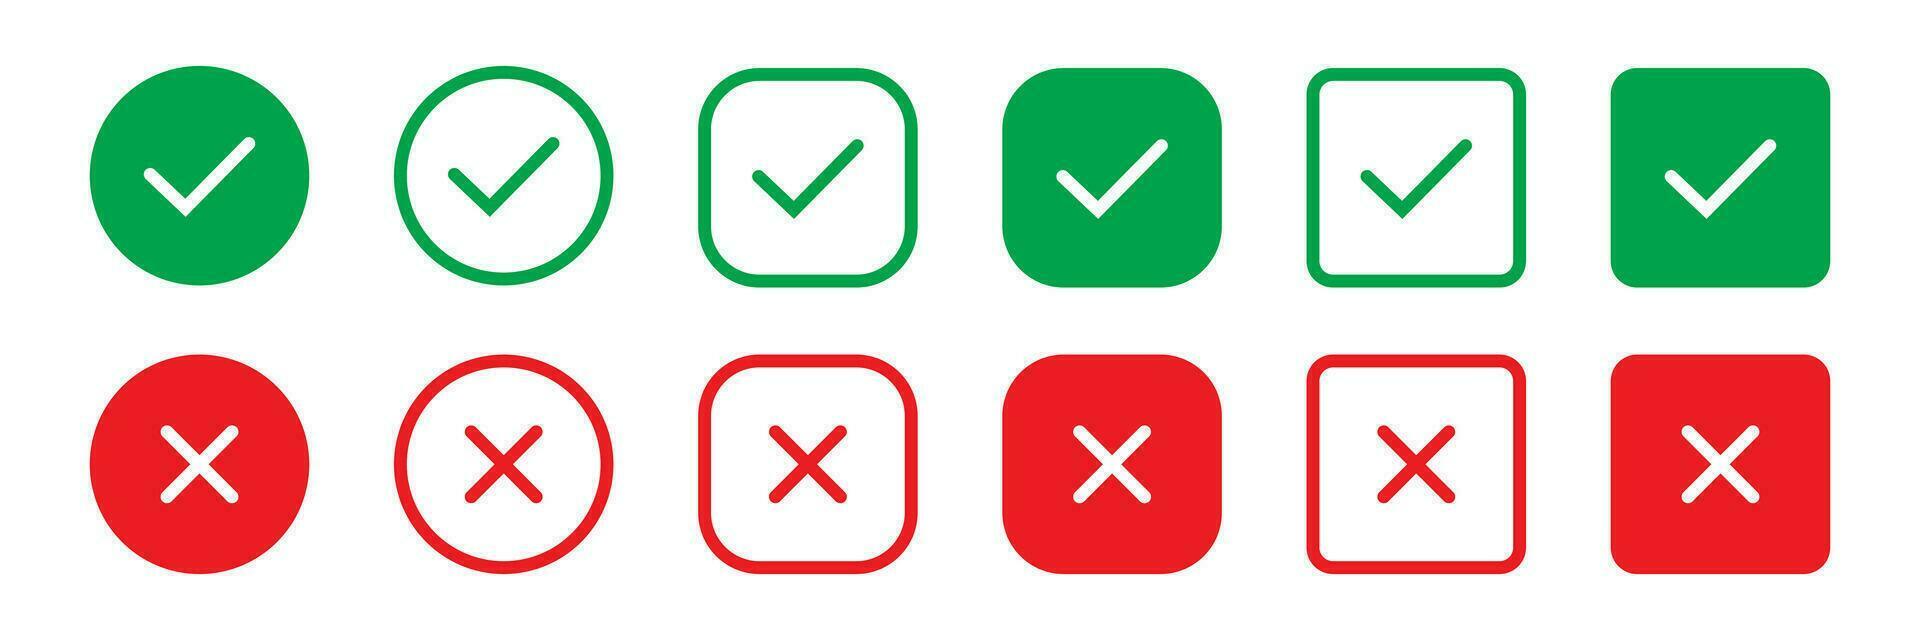 Set green approval check mark and red cross icons in circle and square, checklist signs, flat checkmark approval badge, isolated vector tick symbols.